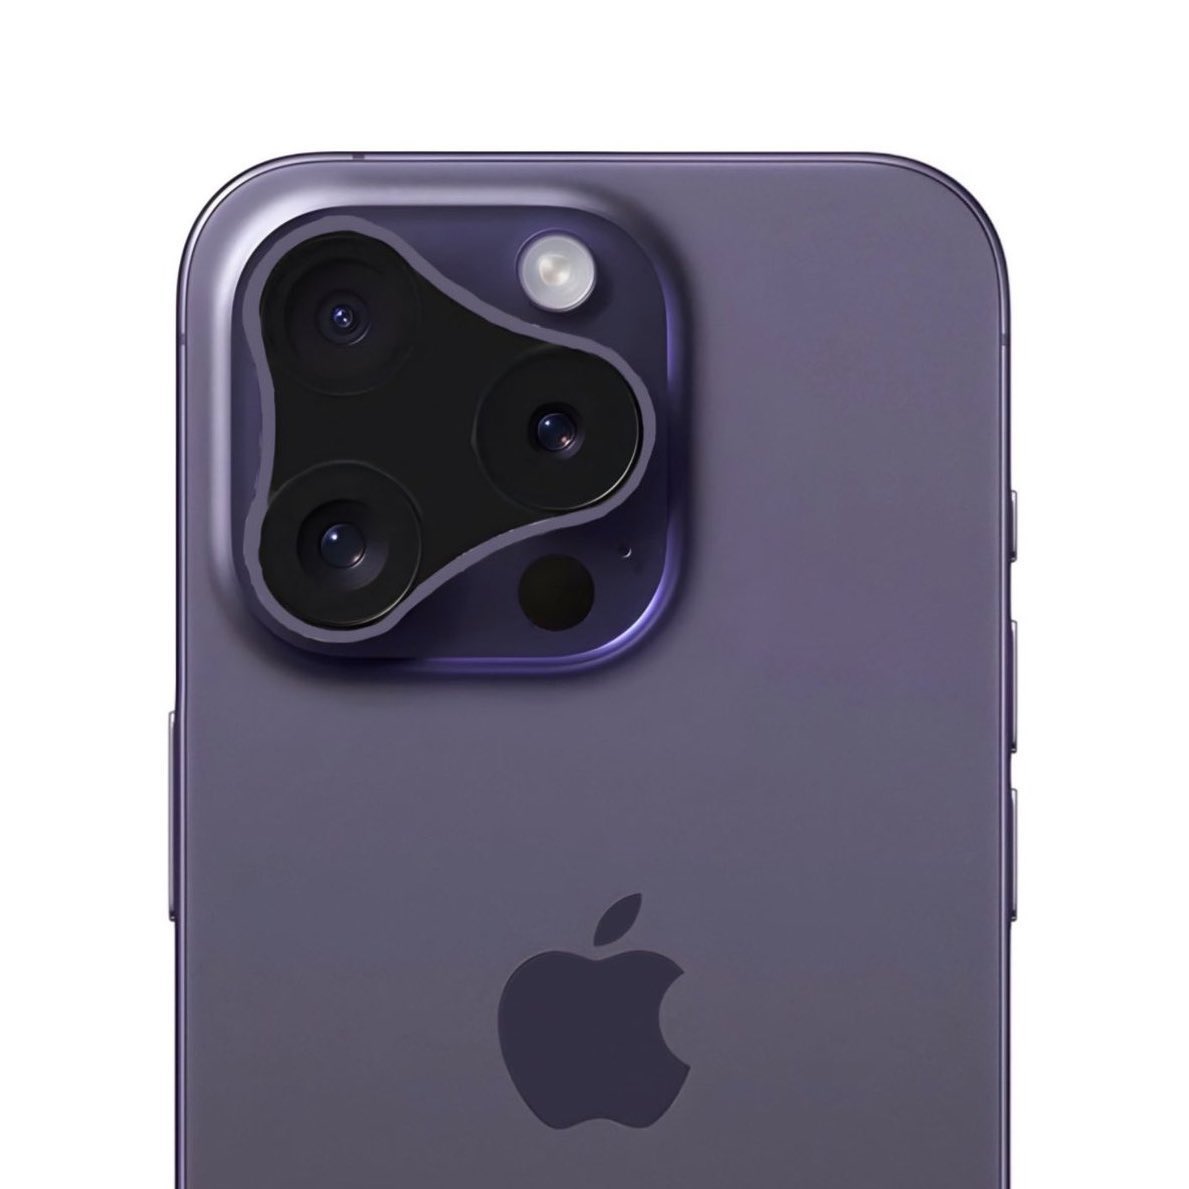 U wanna see an ugly ass design. 
Look no further. 

#iphone16leaks